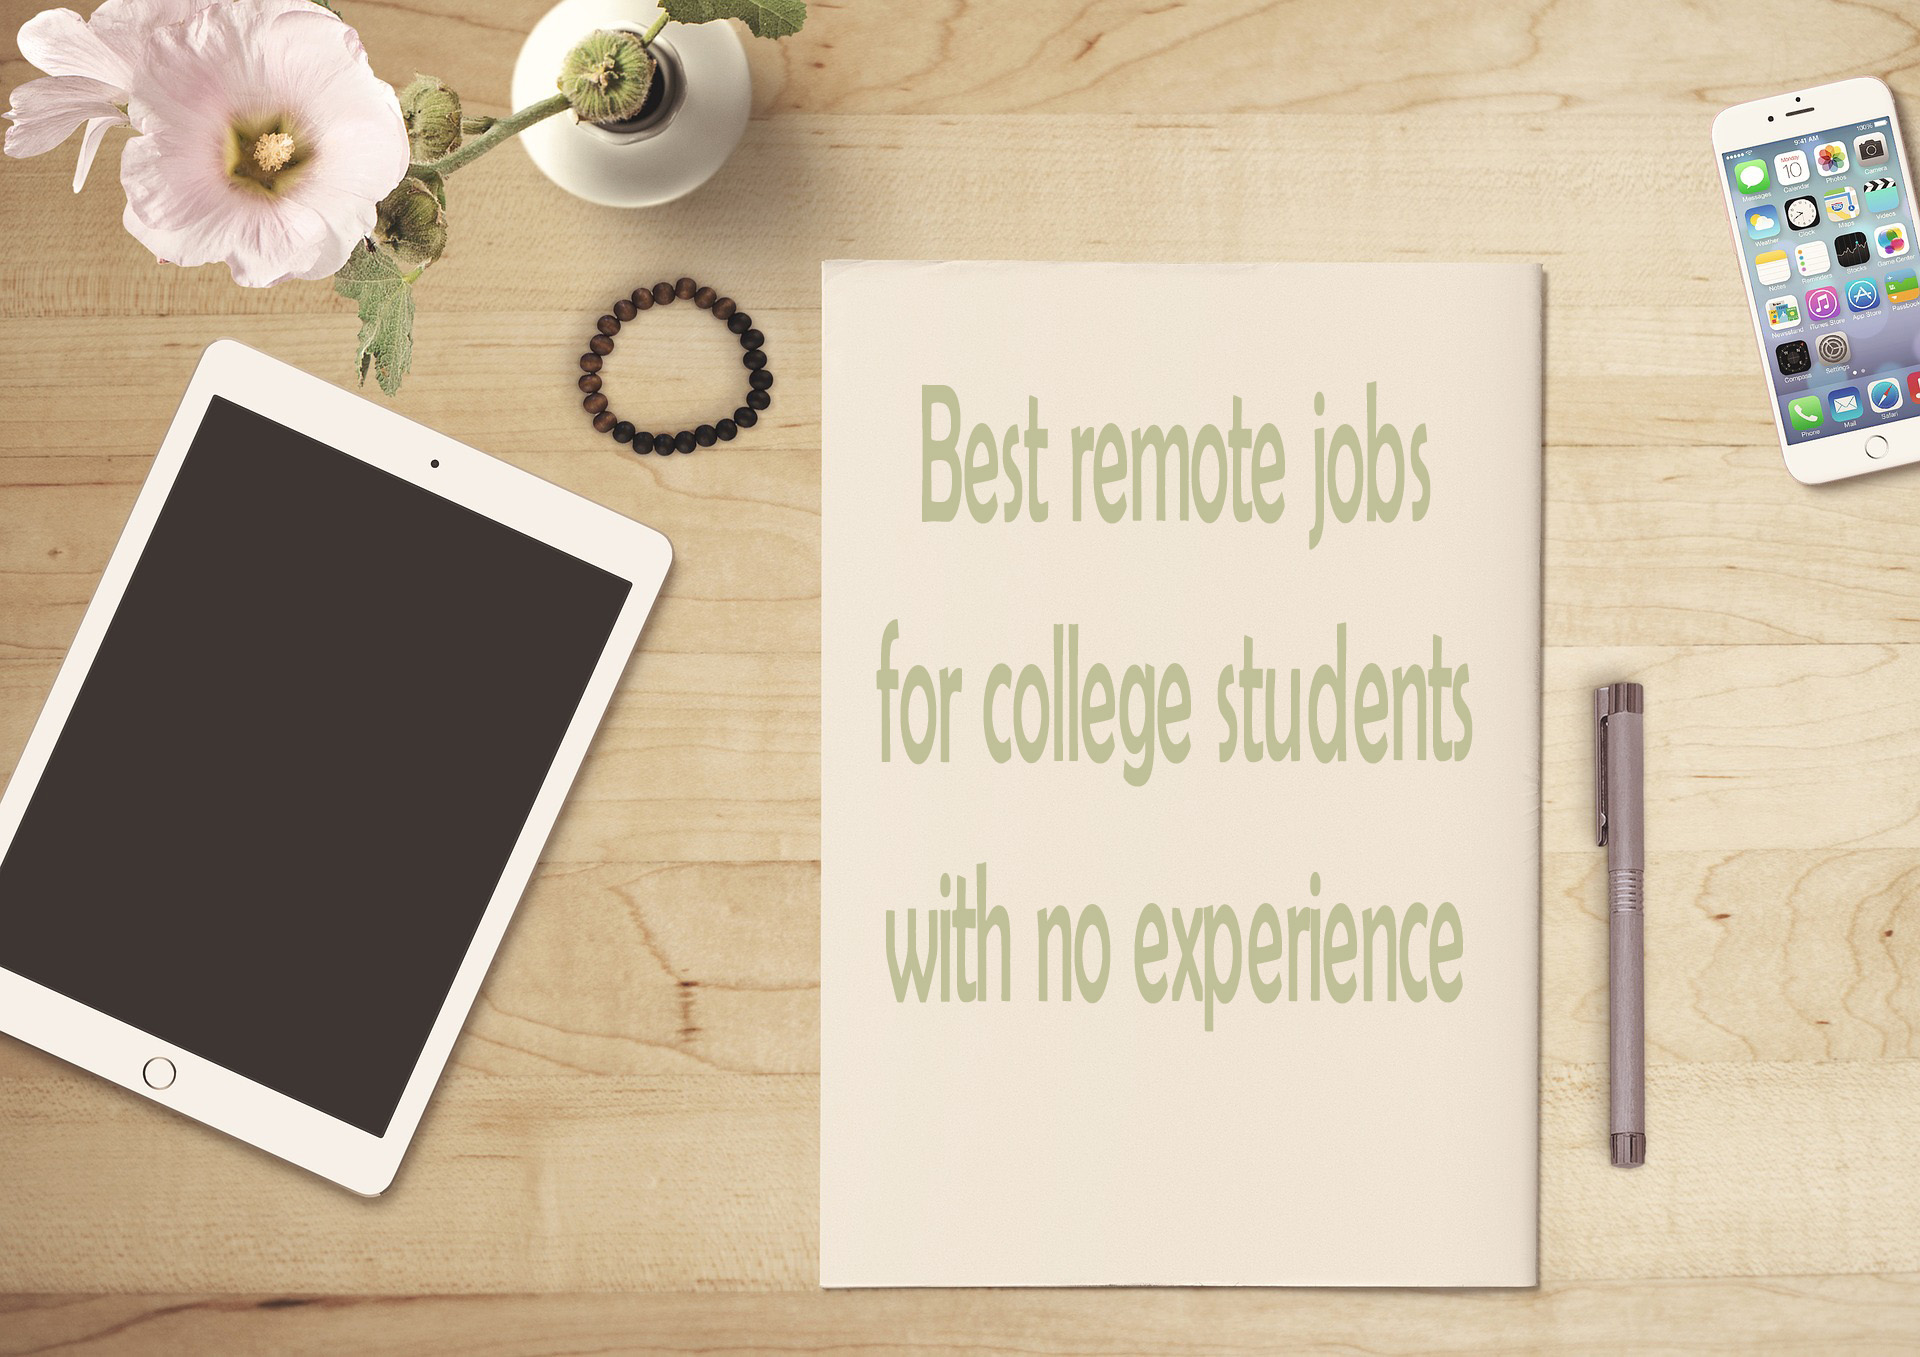 Best remote jobs for college students with no experience